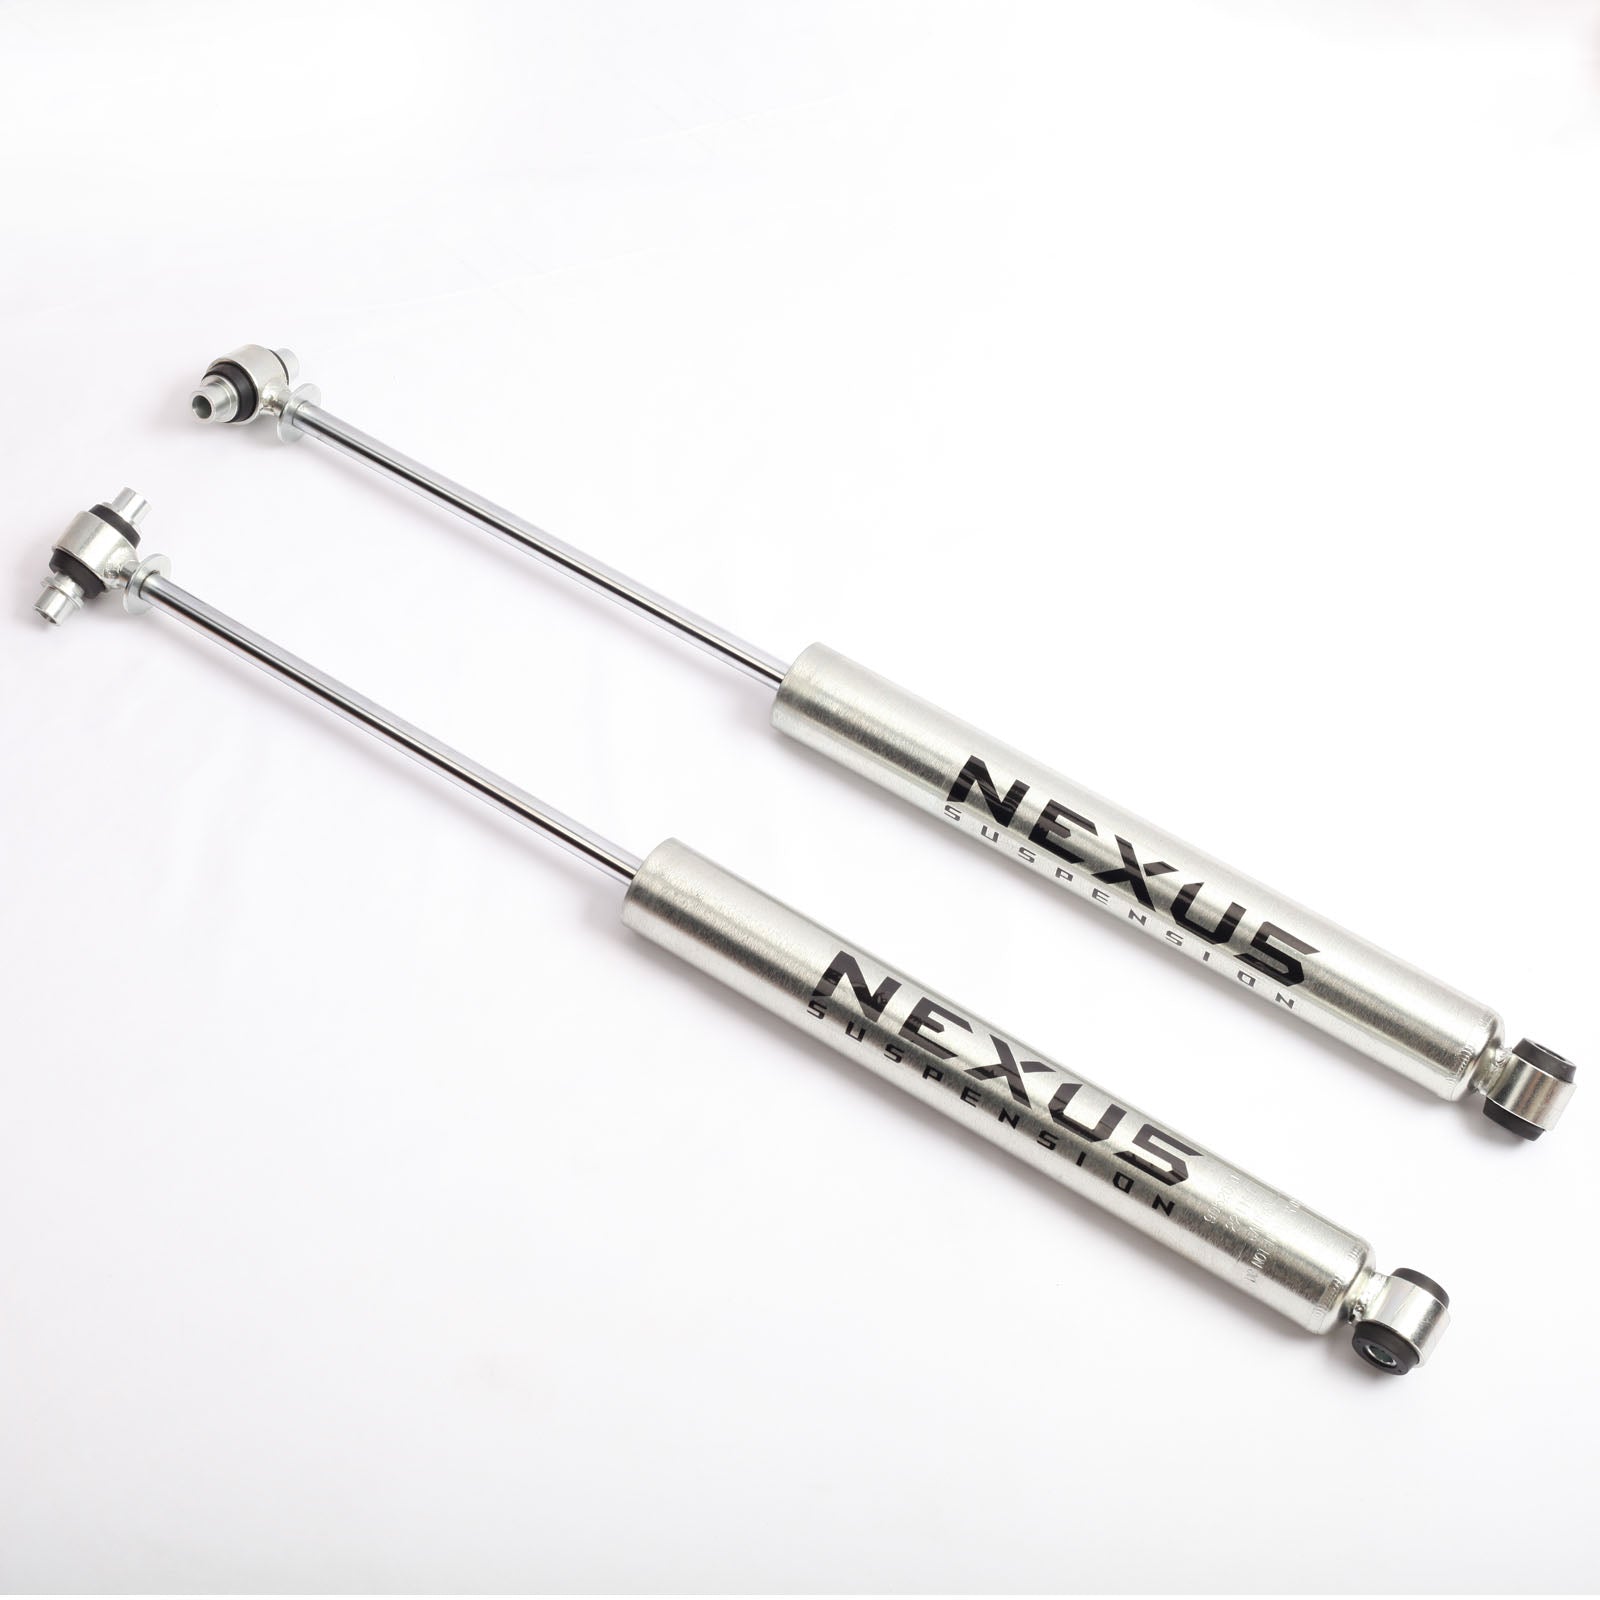 NEXUS SUSPENSION 4 Inch Lift Rear Shock Absorber for 1988-1998 Chevy Suburban Chevy Tahoe 2wd GMC Yukon 2wd,Zinc Plated Coating,Pair Pack